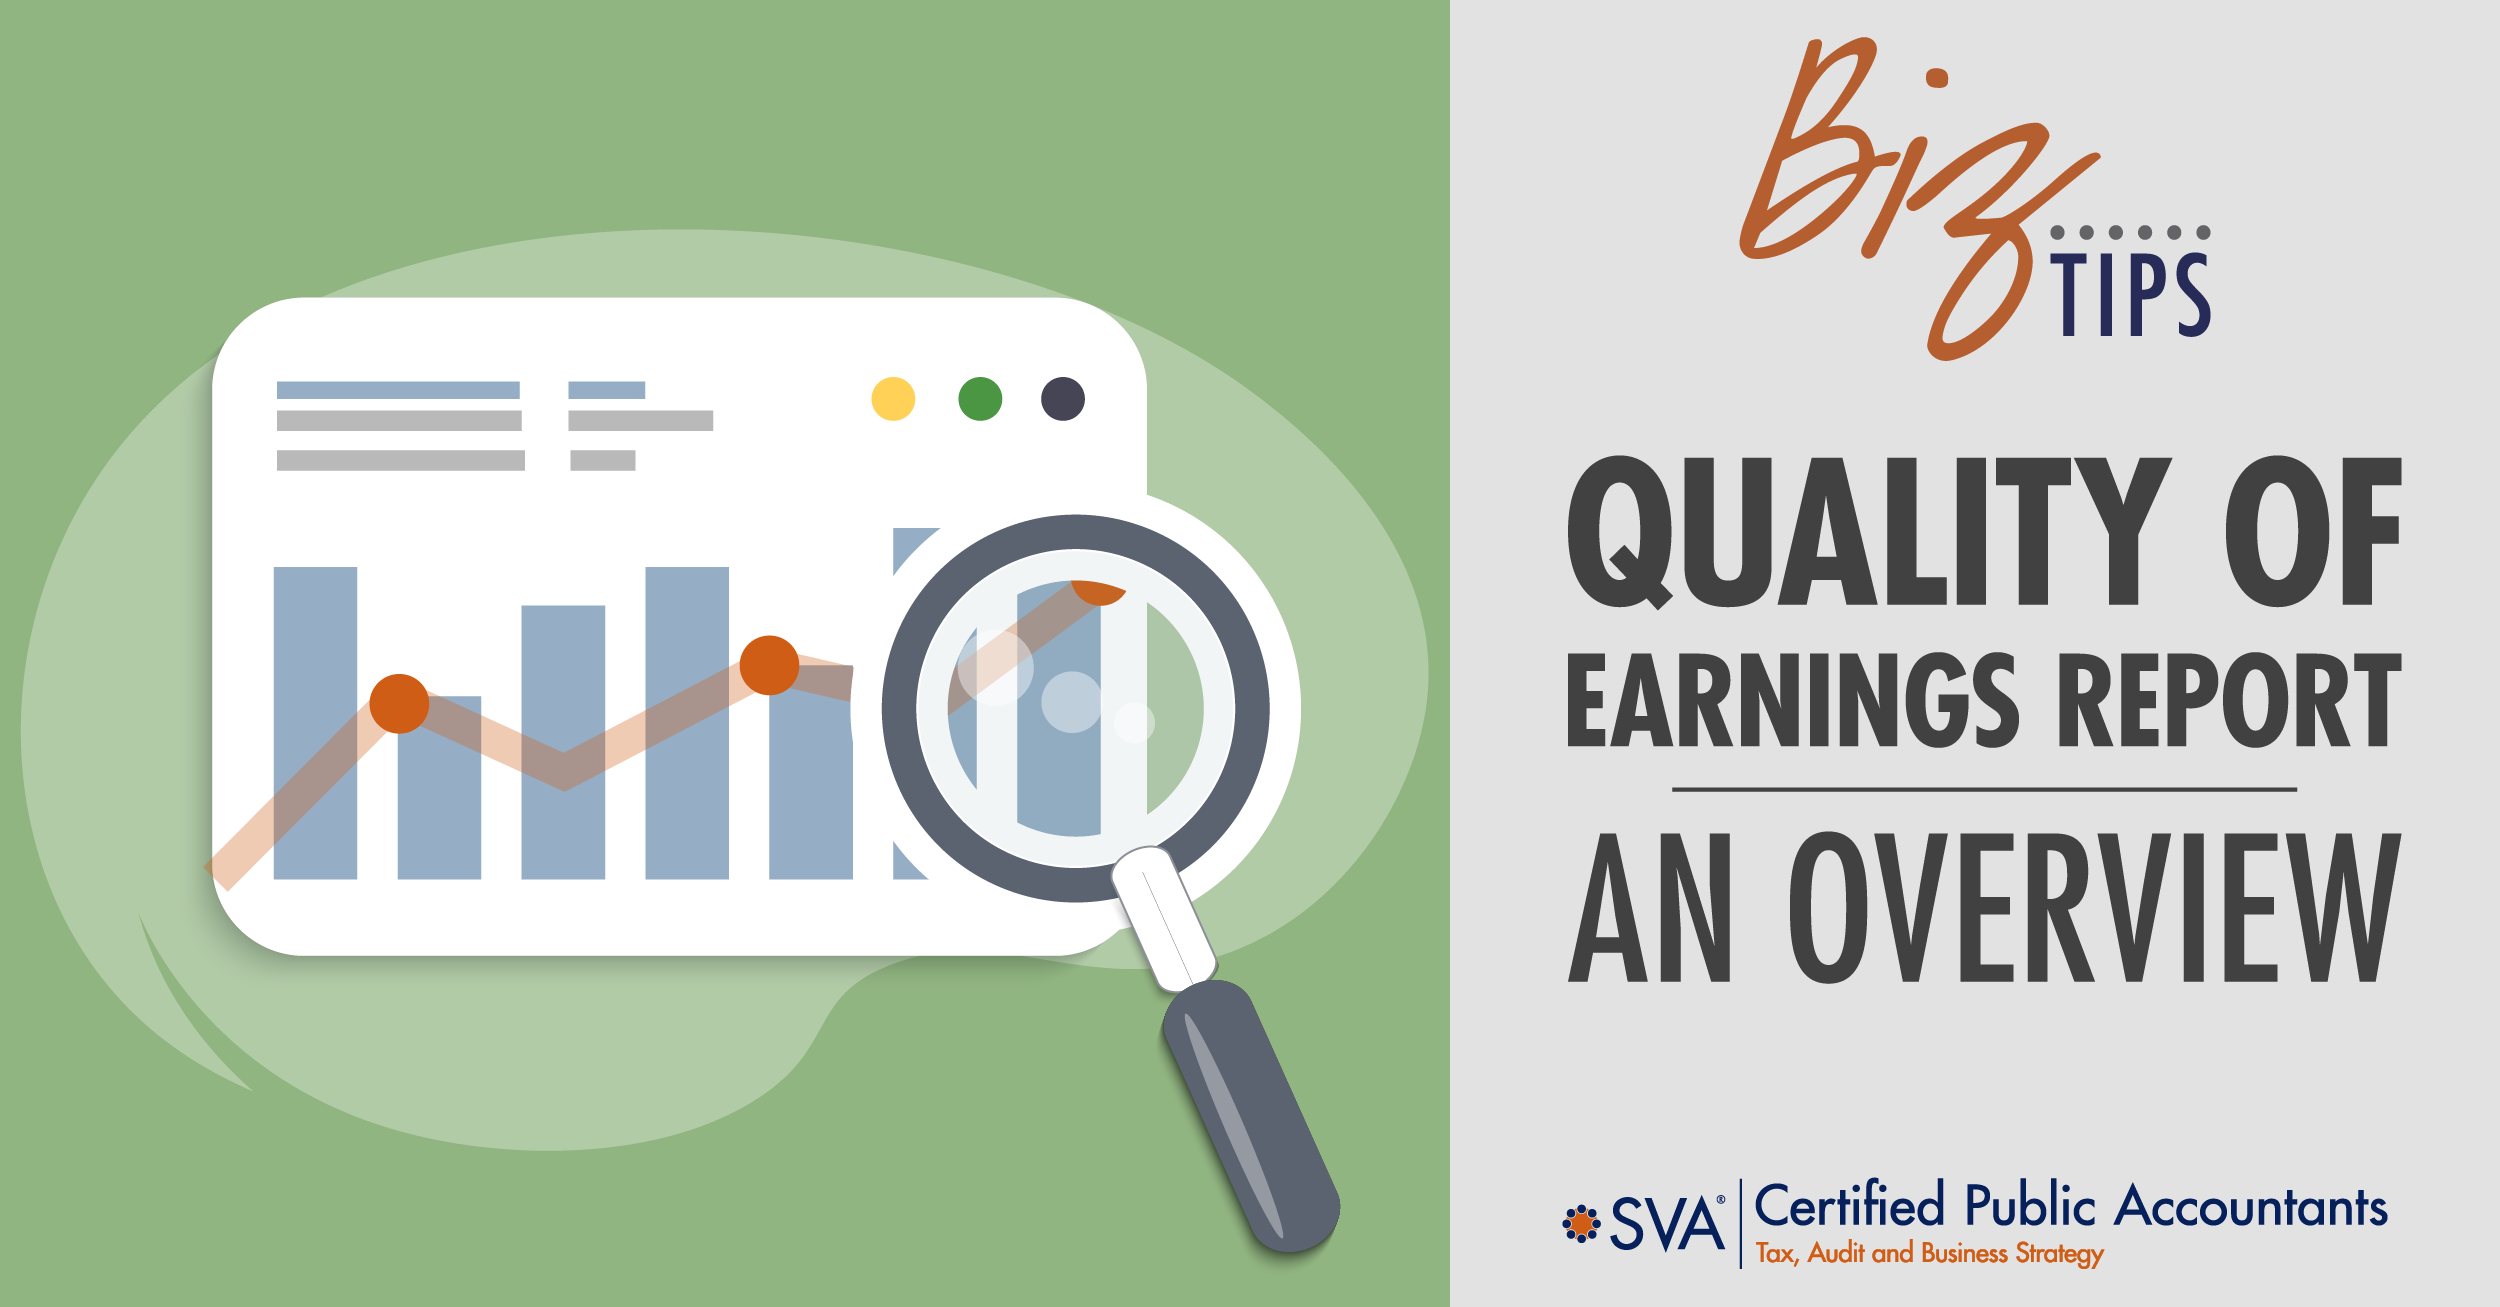 Quality of Earnings Report: An Overview